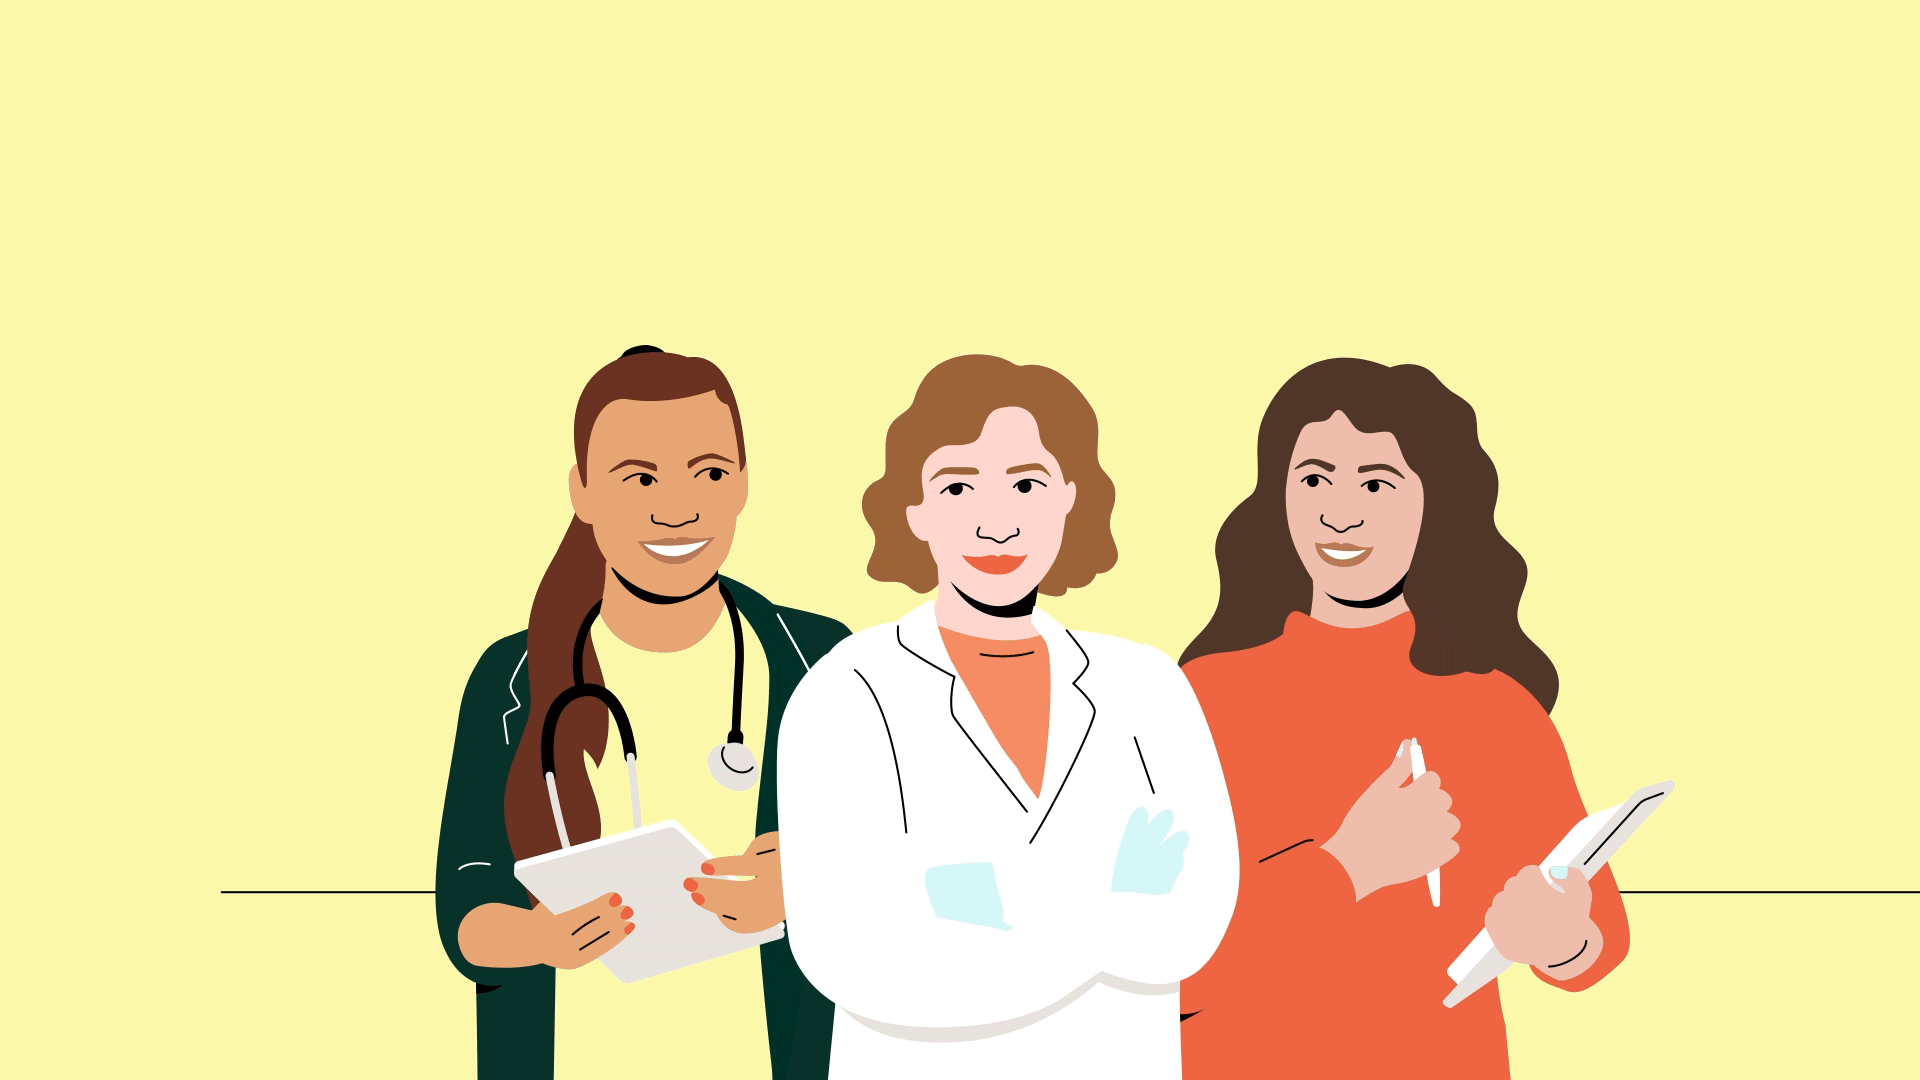 Three illustrated women working and science before yellow background, animated